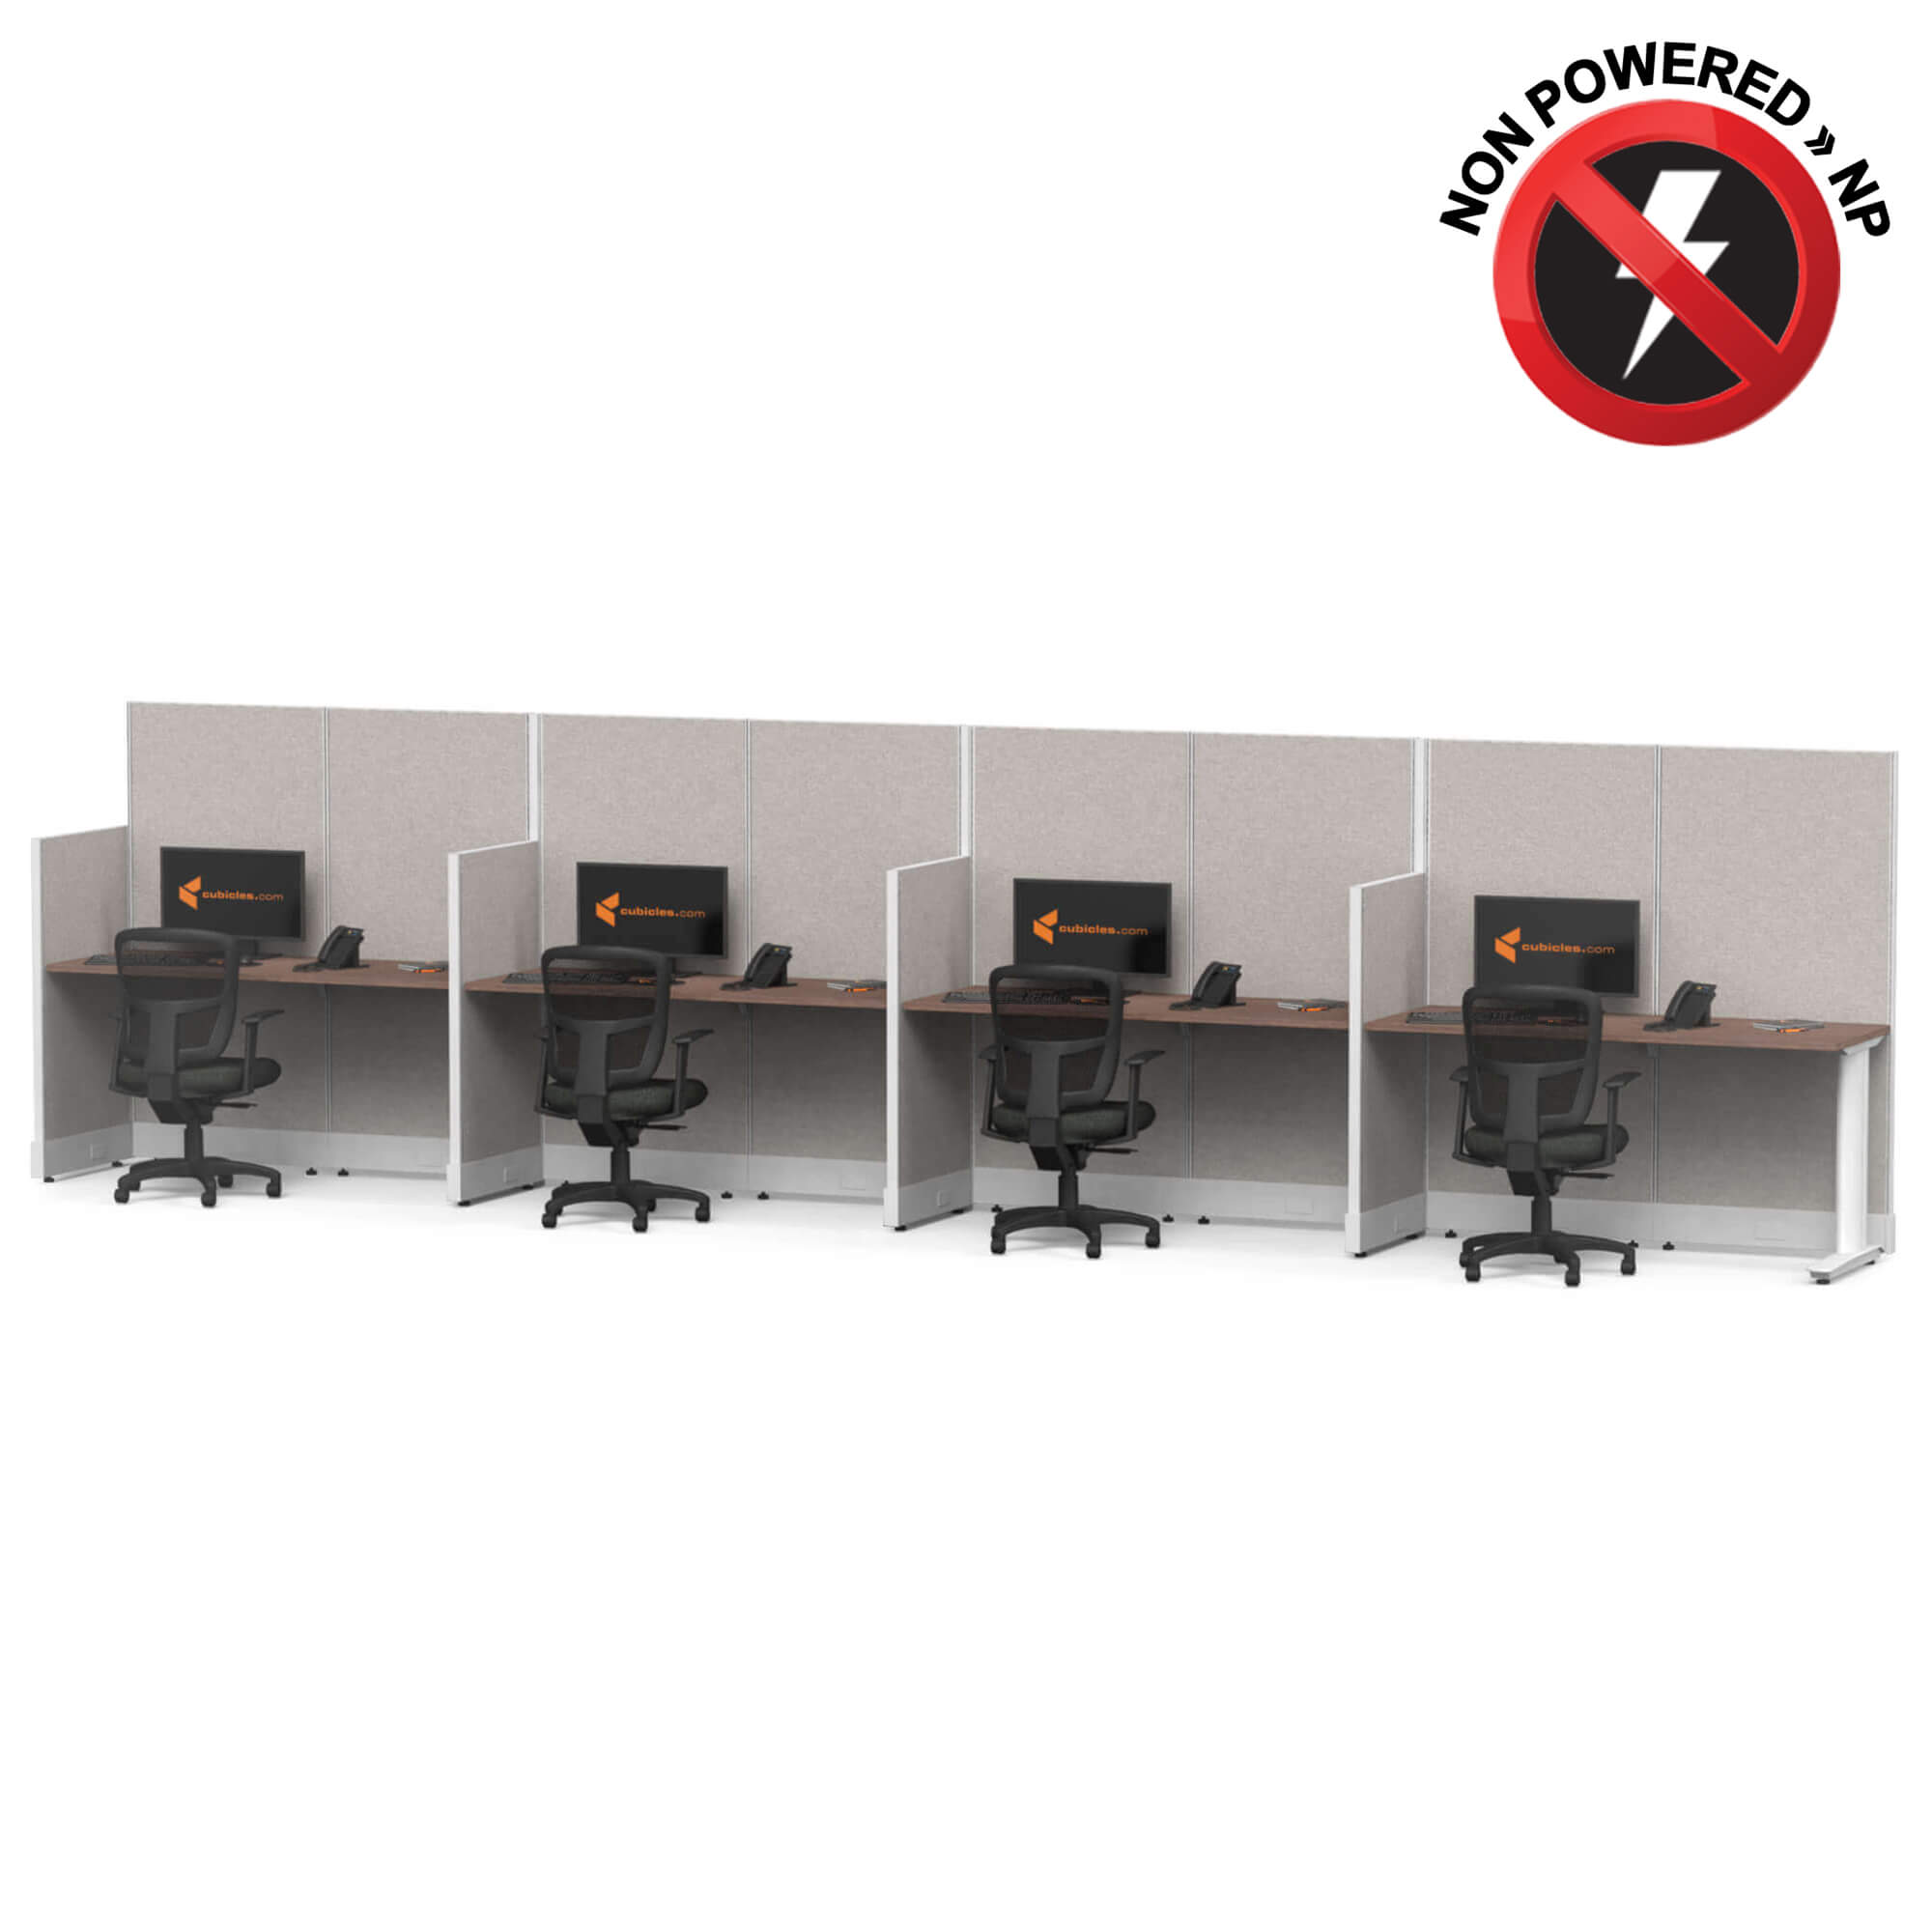 cubicle-desk-straight-workstation-4pack-inline-non-powered-sign-1-2.jpg